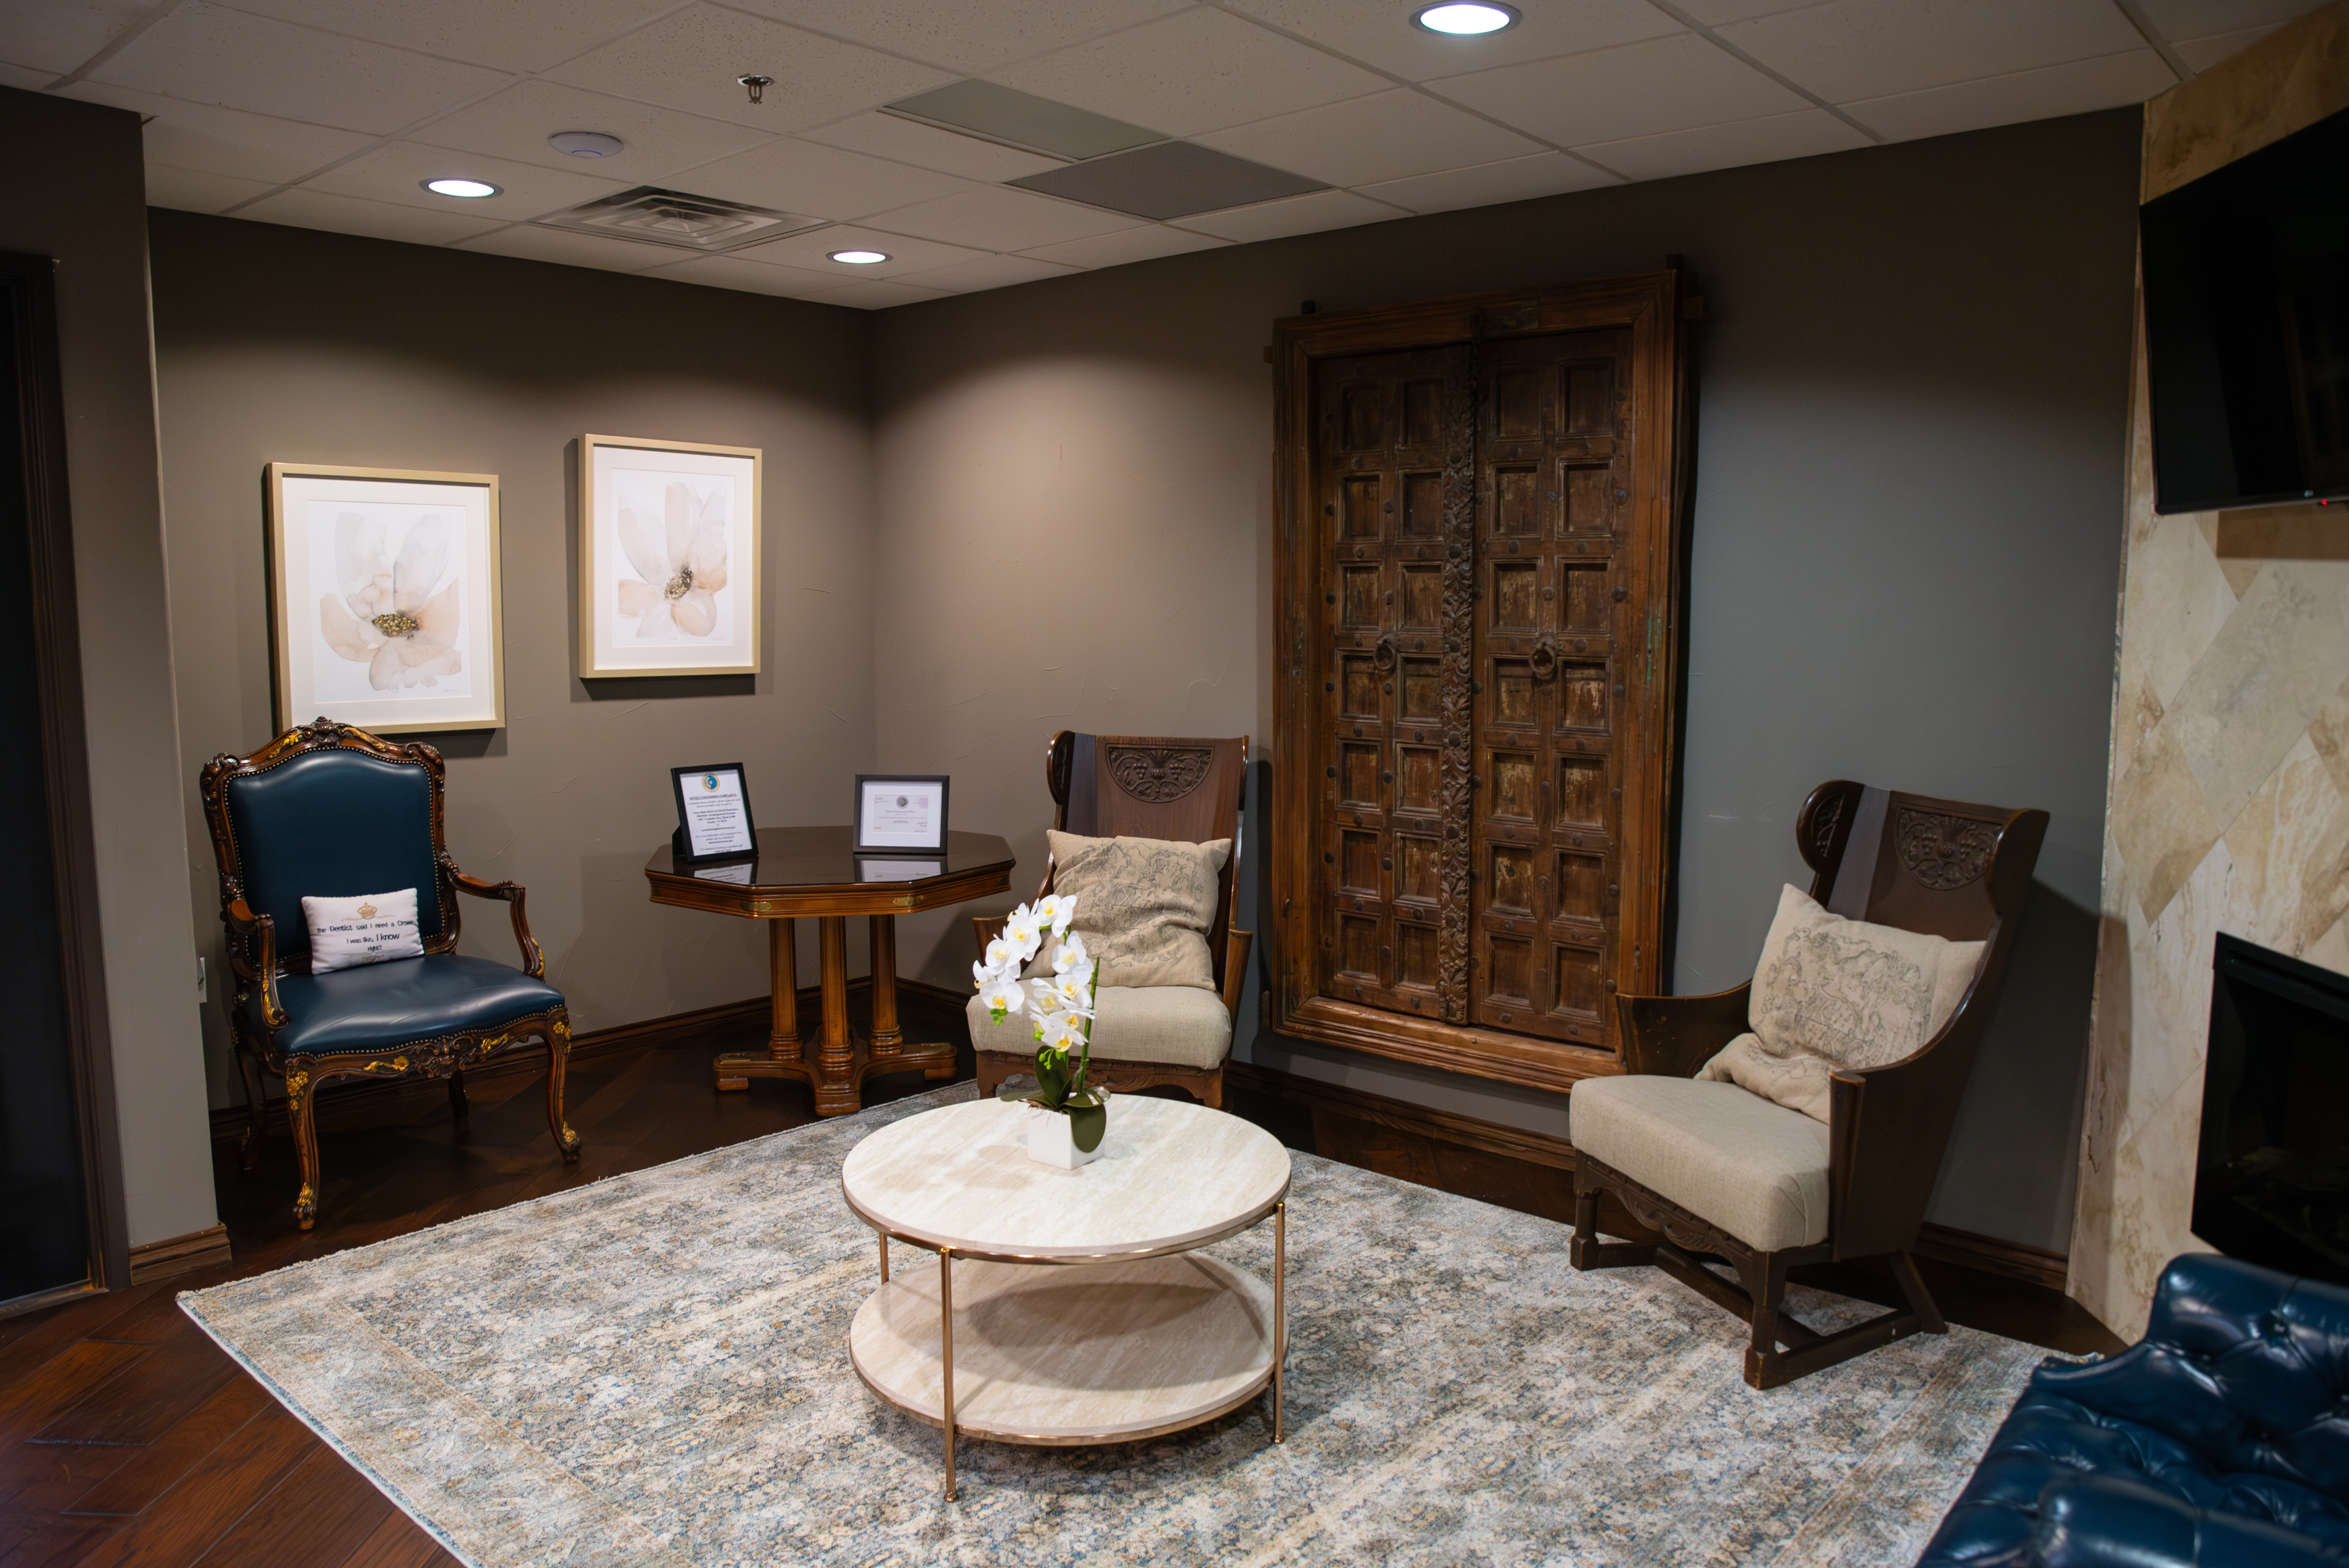 Luminescence Dentistry Waiting room with three elegant wooden chairs and a small beige center table